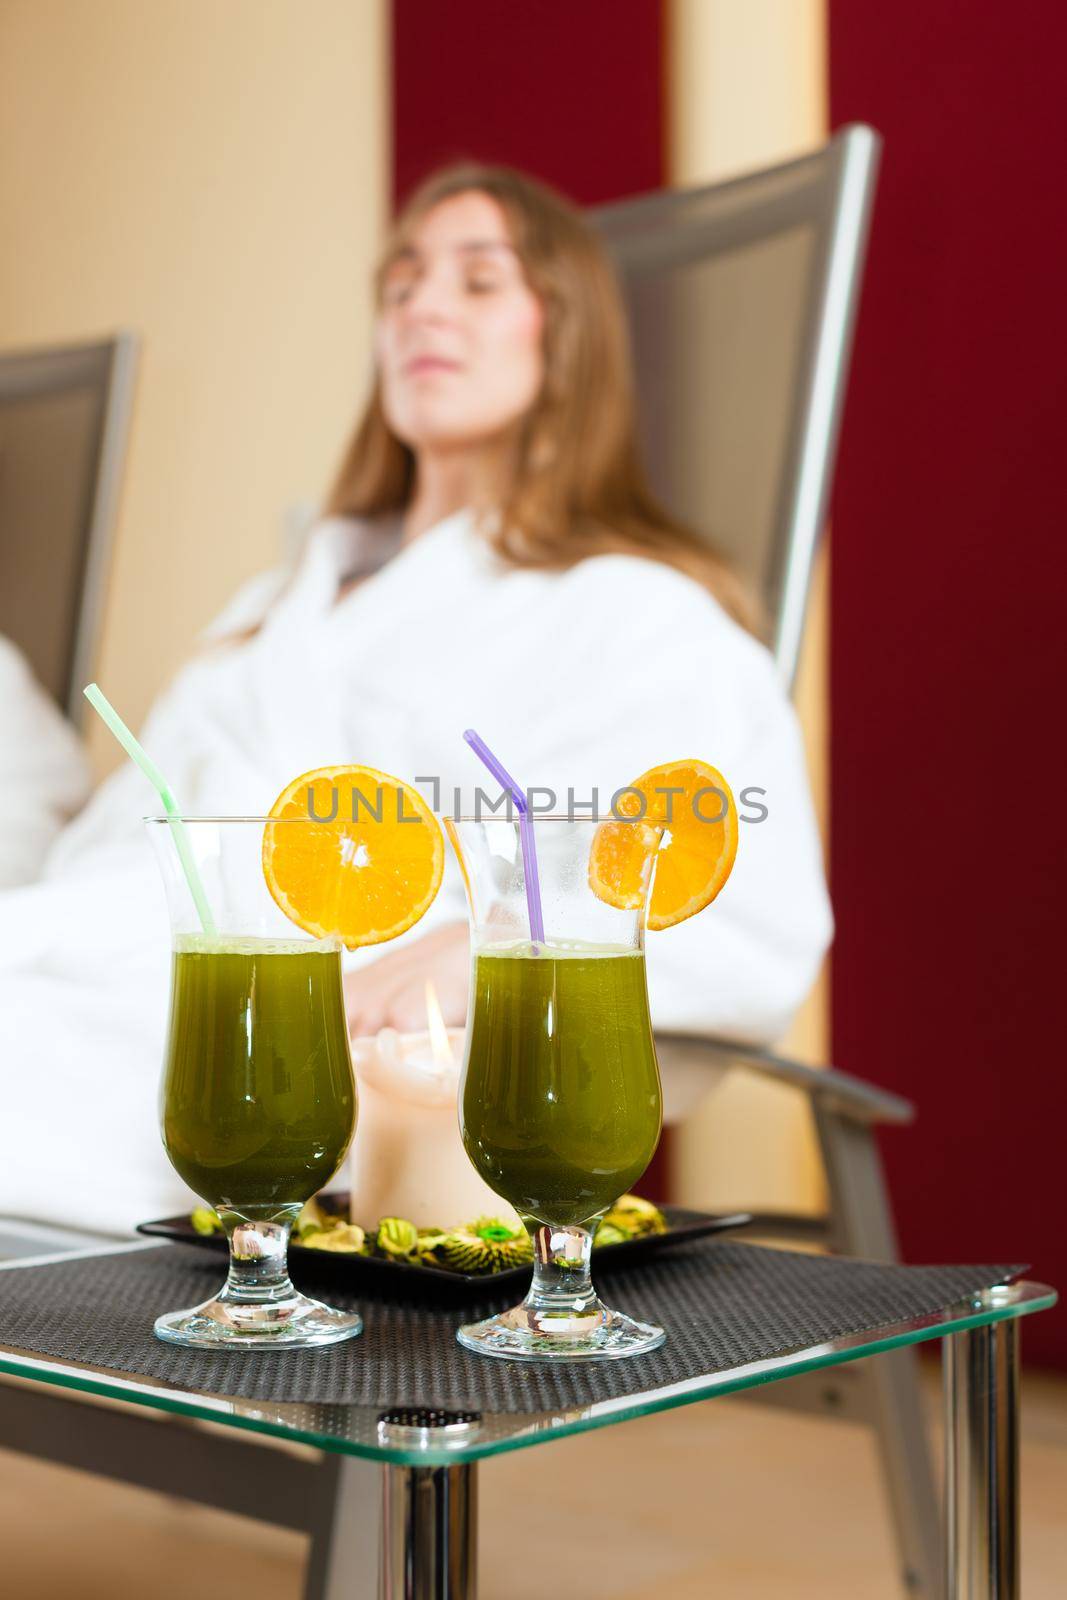 Chlorophyll-Shake in spa are on table, people are in Background